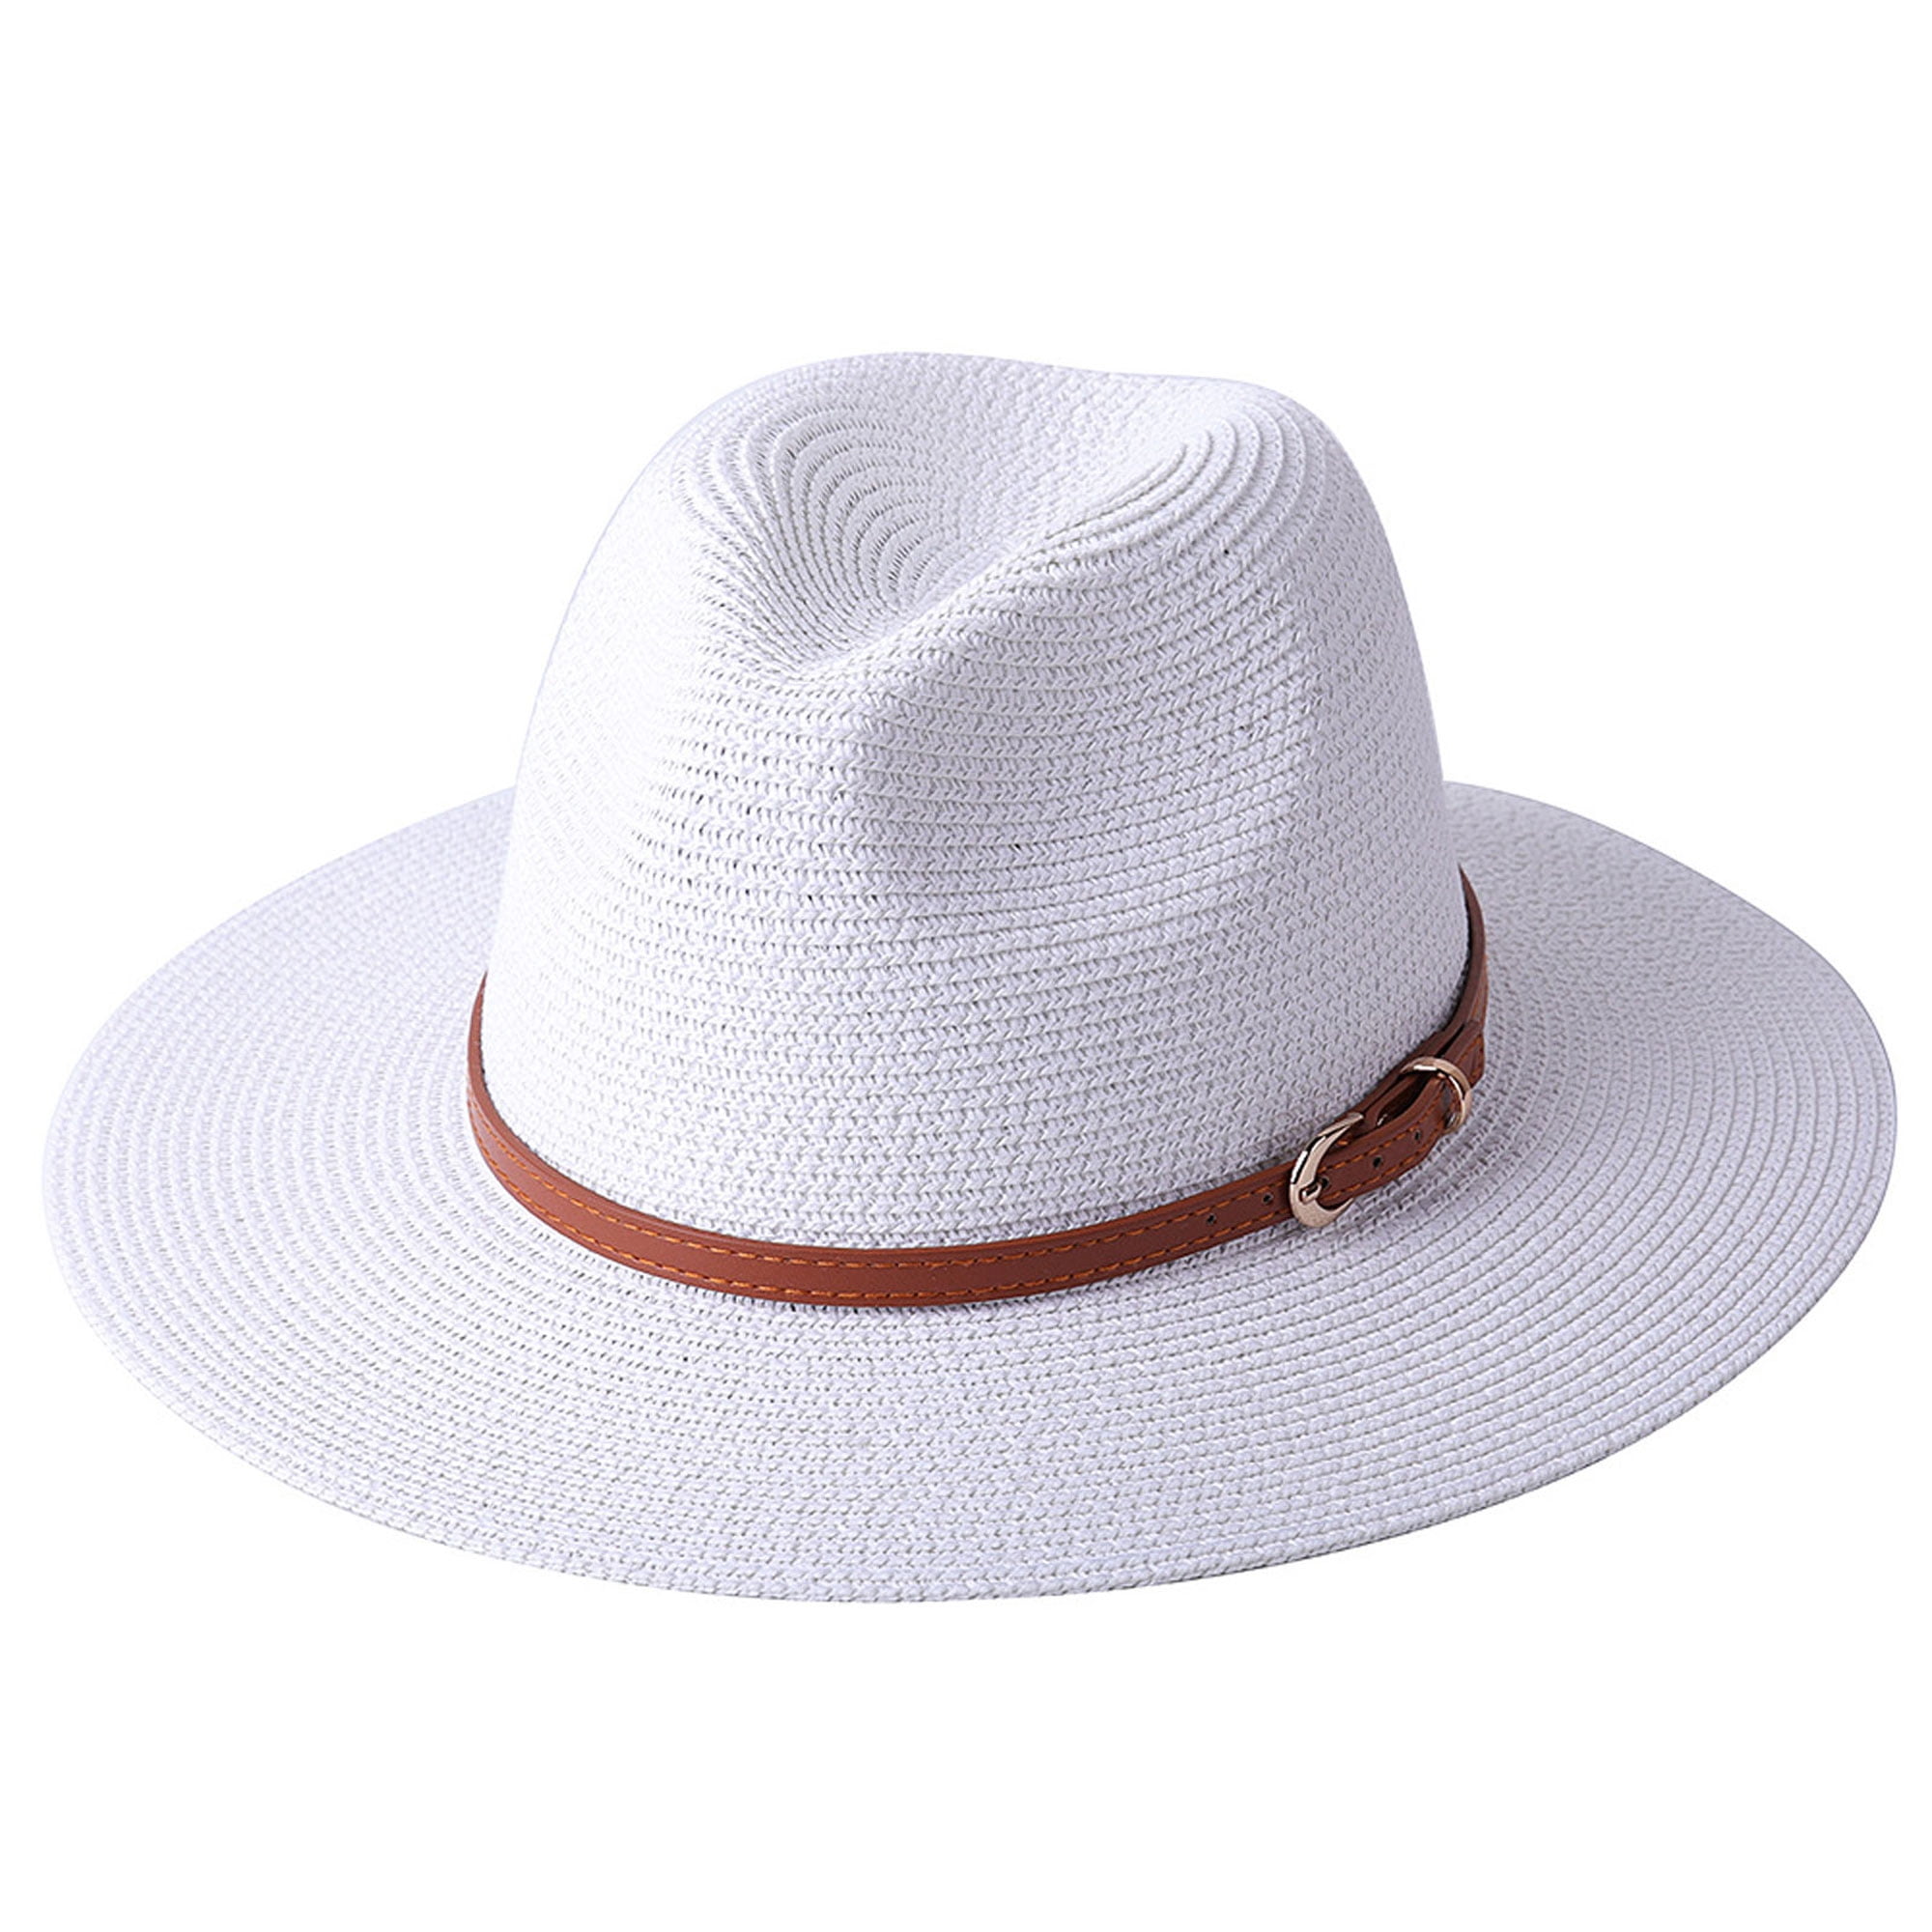 HAT unisex Crushable Easy pack Suitable for Holiday Fedora Trilby Sun Hat 